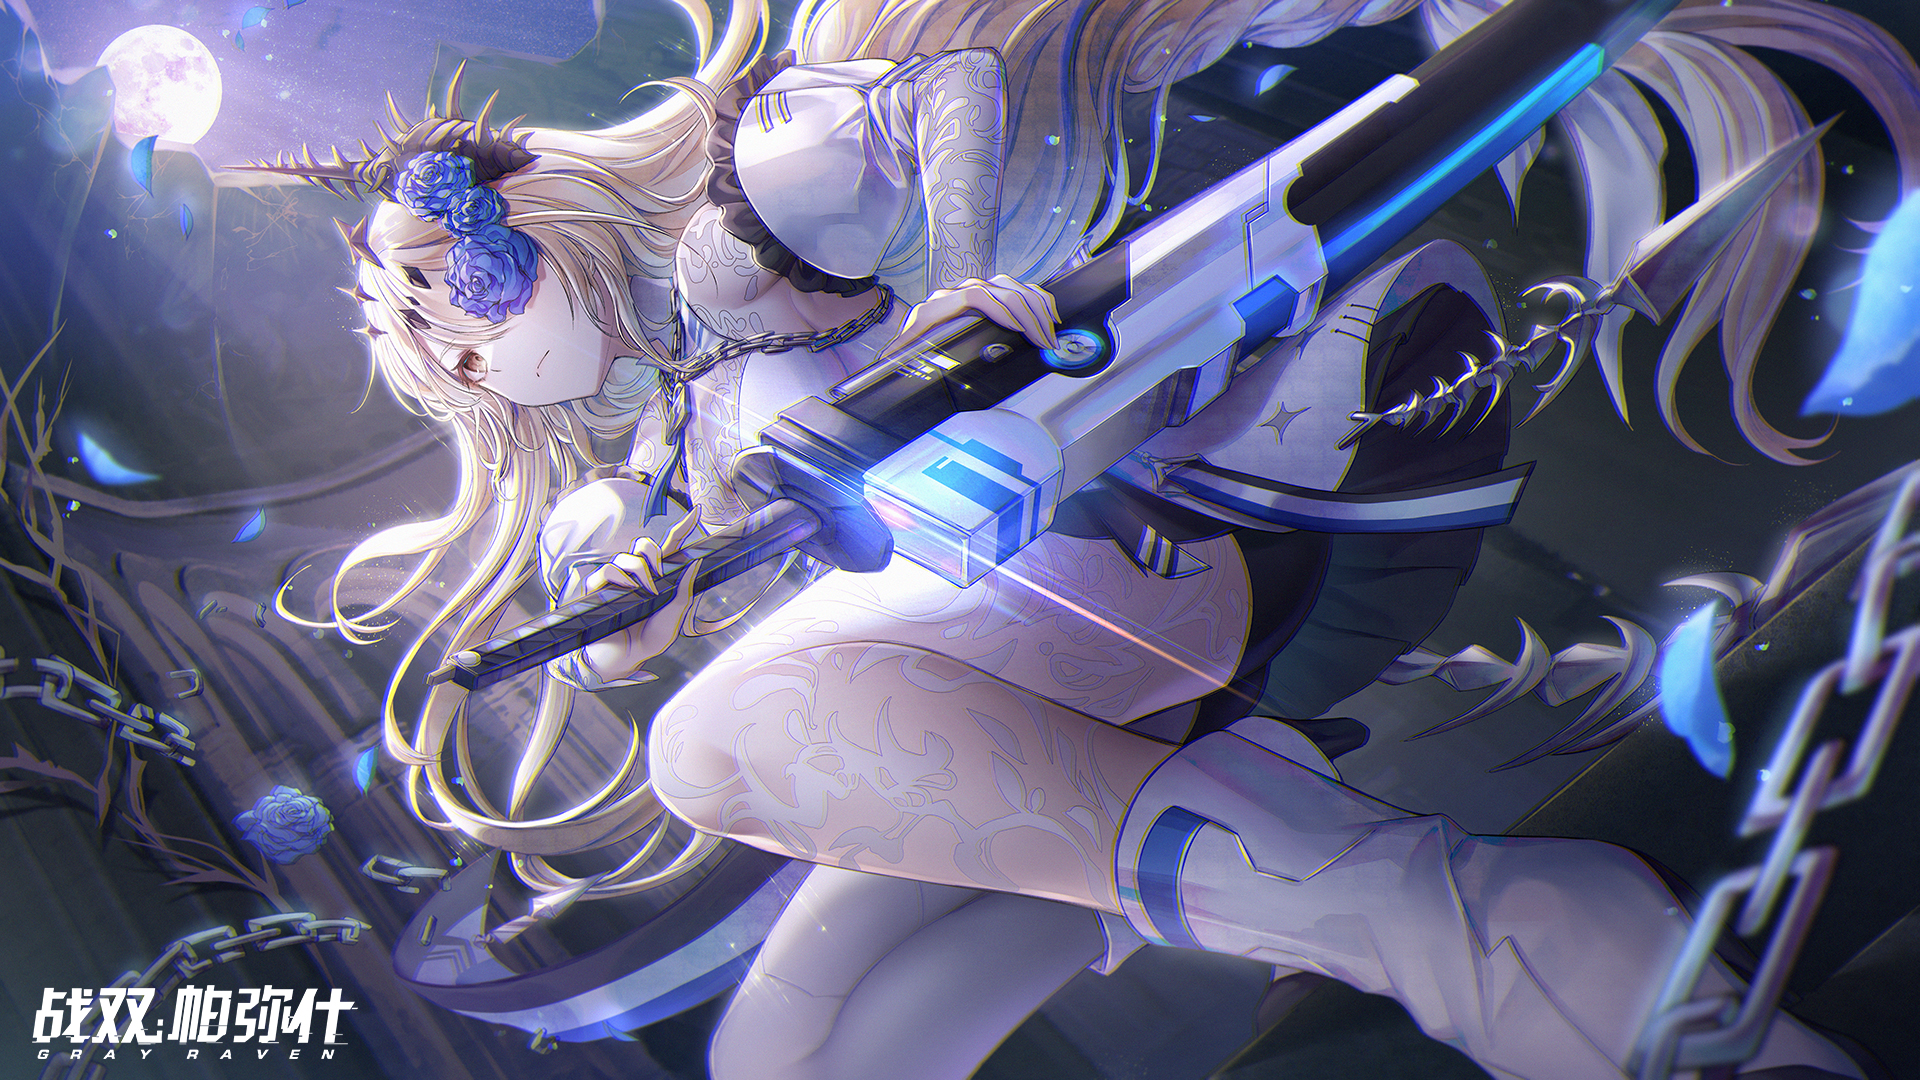 Anime 1920x1080 Punishing: Gray Raven Alpha (Punishing Gray Raven) anime anime girls long hair weapon Moon petals chains video game characters video game girls video games flowers moonlight low-angle